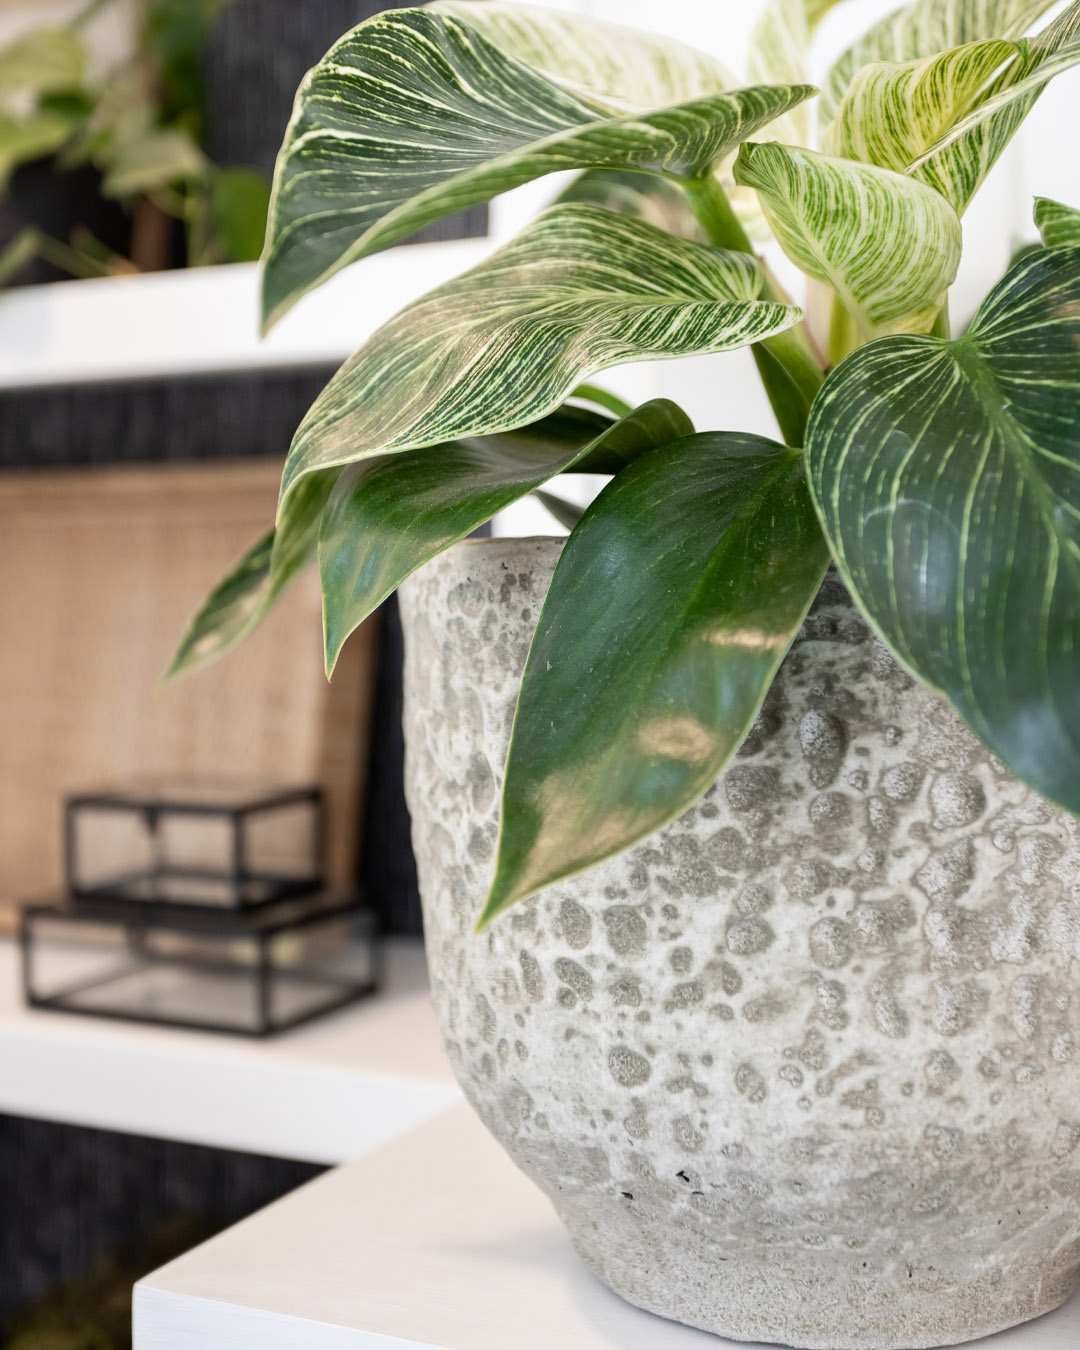 Today I'm going to tell you about another absolute favourite houseplant of mine. Here's how to grow a philodendron Birkin!